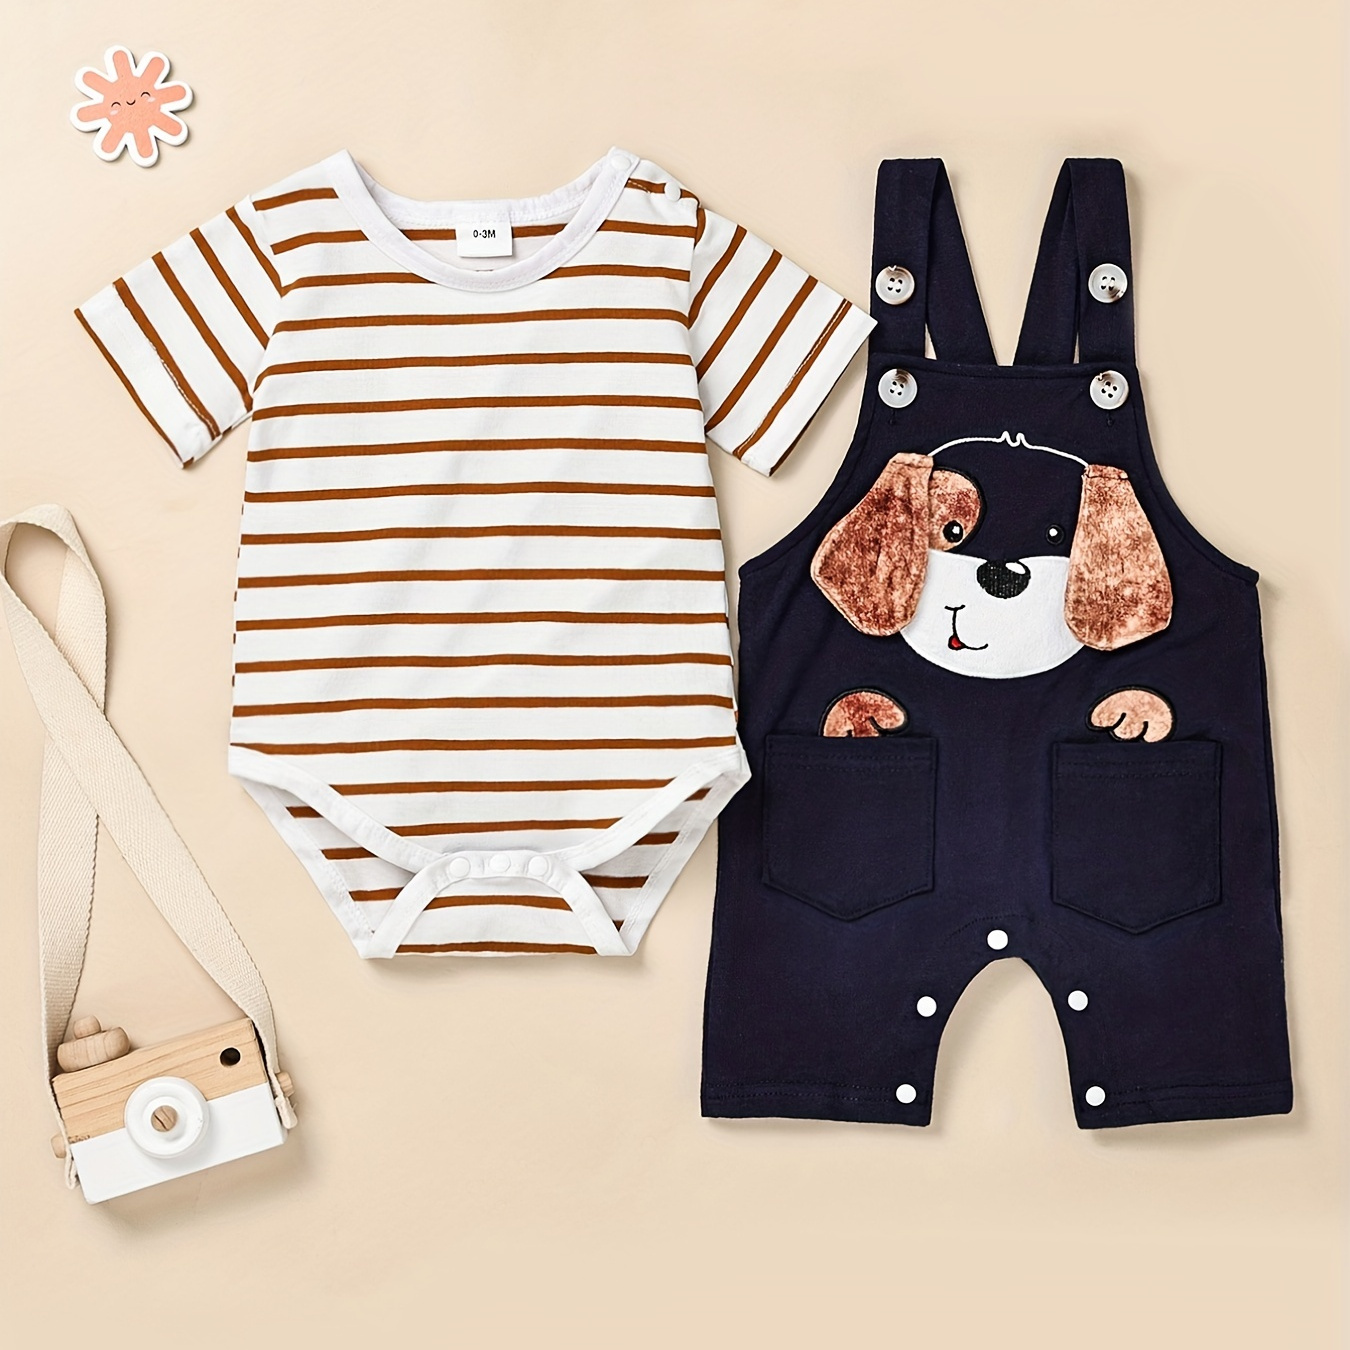 

Baby Boy's Outfit - Striped Long Sleeve Infant Romper & Cute Cartoon Overall Pants Set